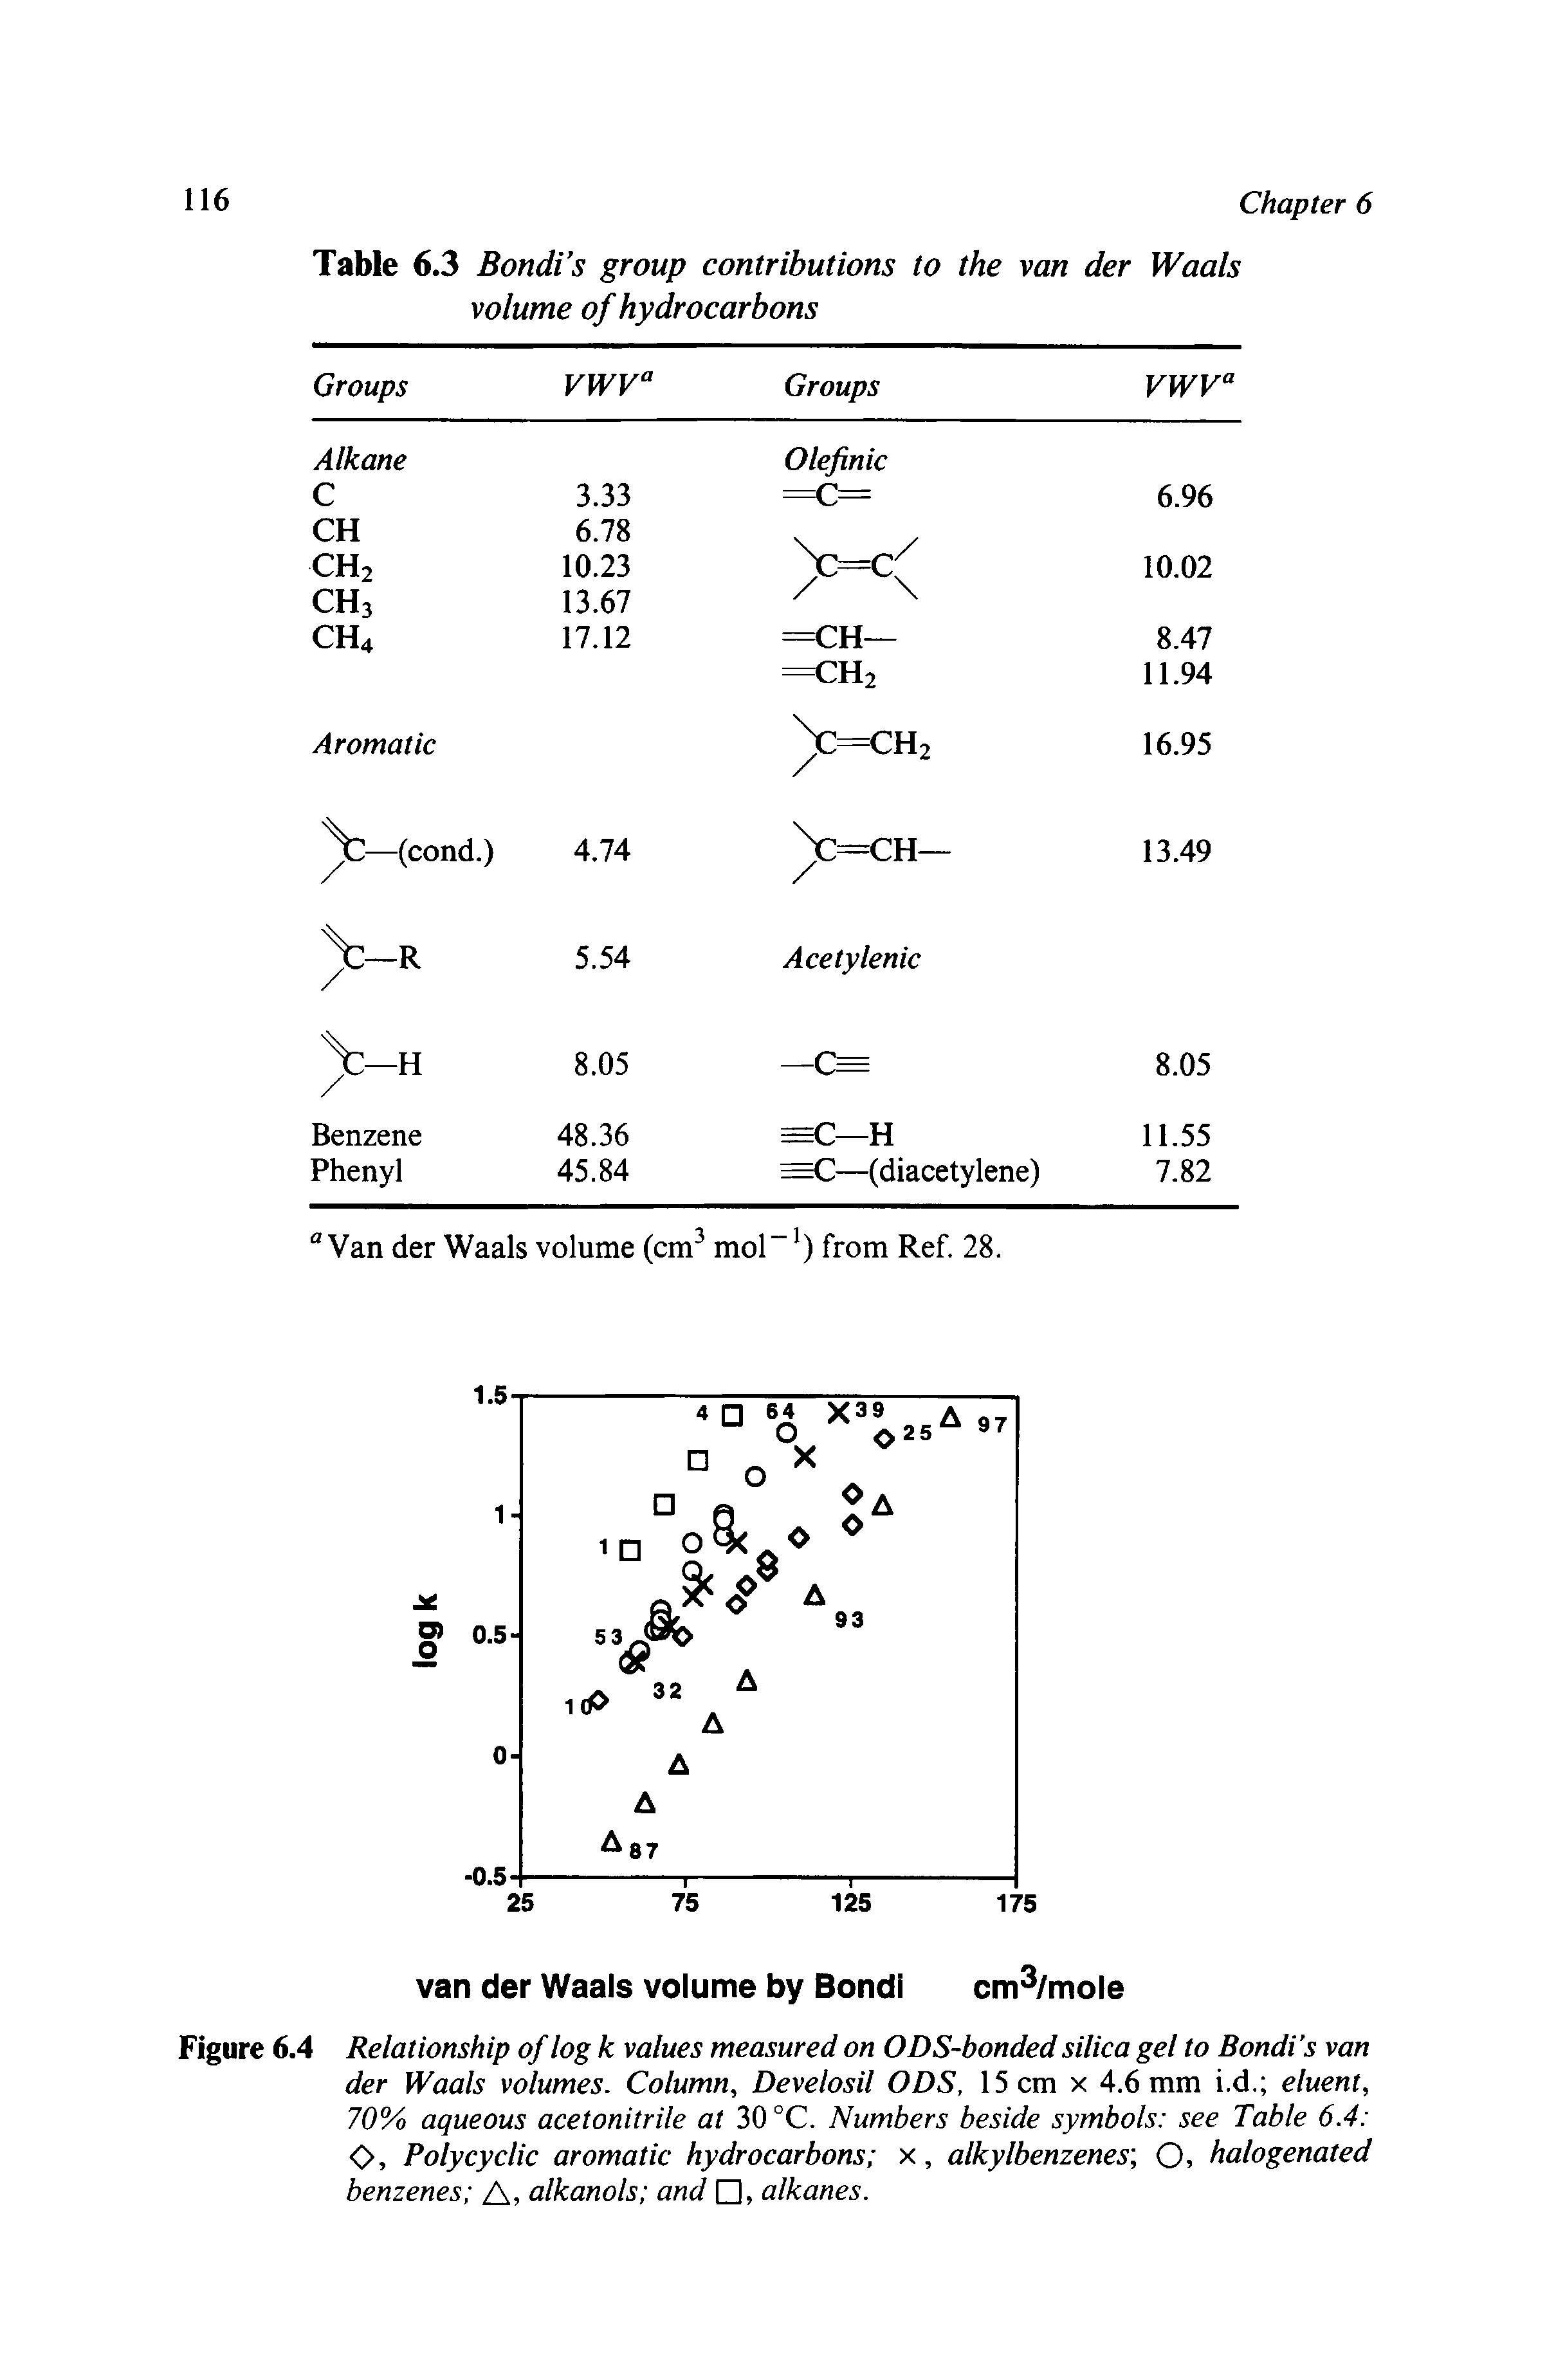 Figure 6.4 Relationship of log k values measured on ODS-bonded silica gel to Bondi s van der Waals volumes. Column, Develosil ODS, 15 cm x 4.6 mm i.d. eluent, 70% aqueous acetonitrile at 30 °C. Numbers beside symbols see Table 6.4 <>, Polycyclic aromatic hydrocarbons x, alkylbenzenes O, halogenated benzenes A, alkanols and , alkanes.